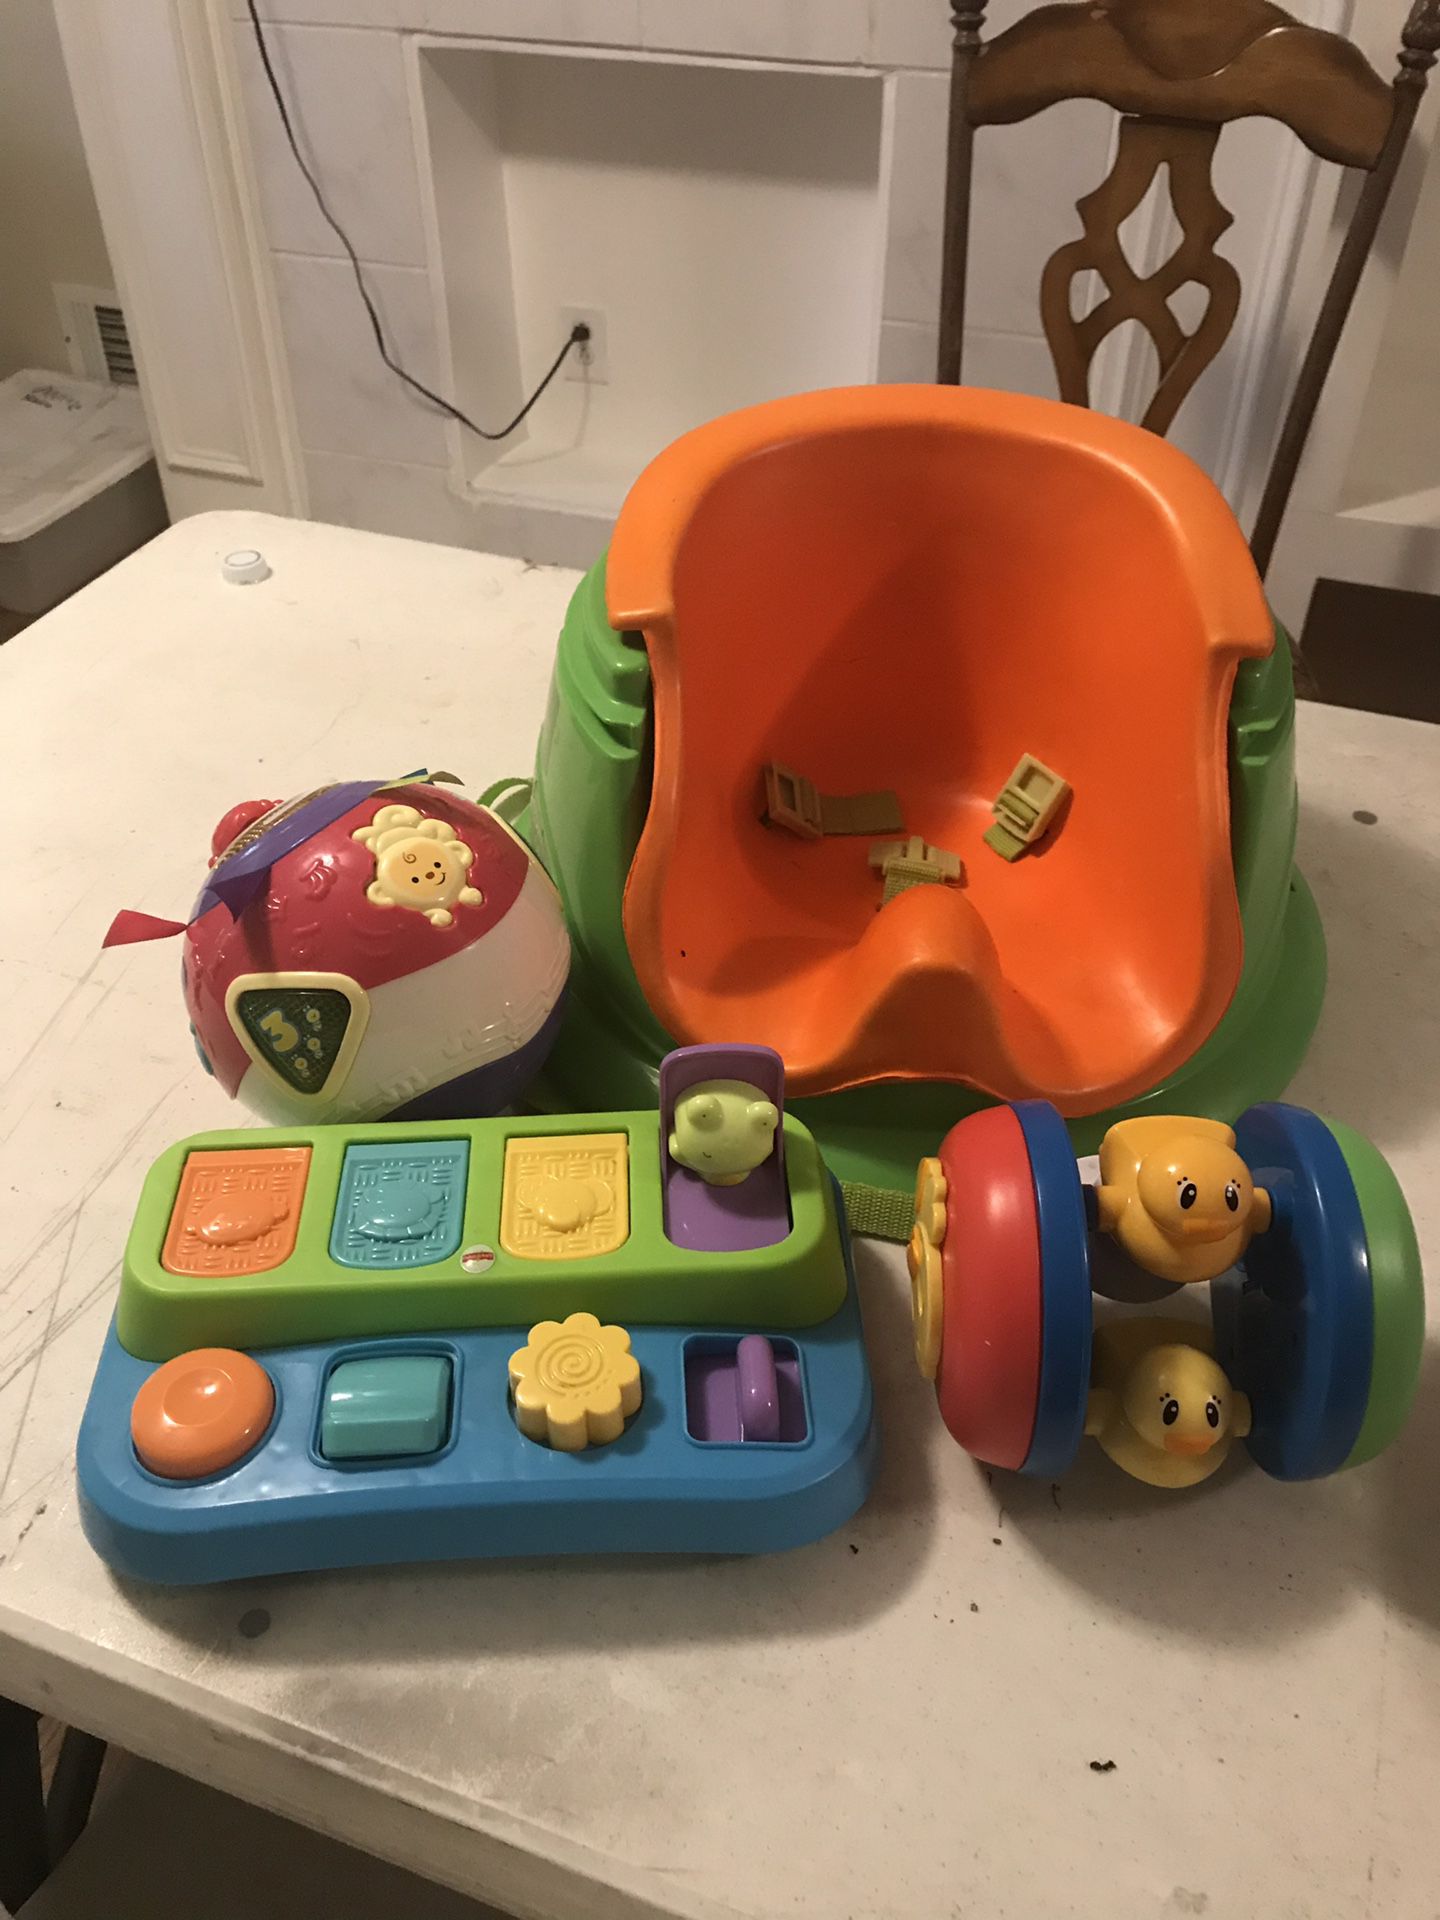 Toys And booster seat$15 for everything